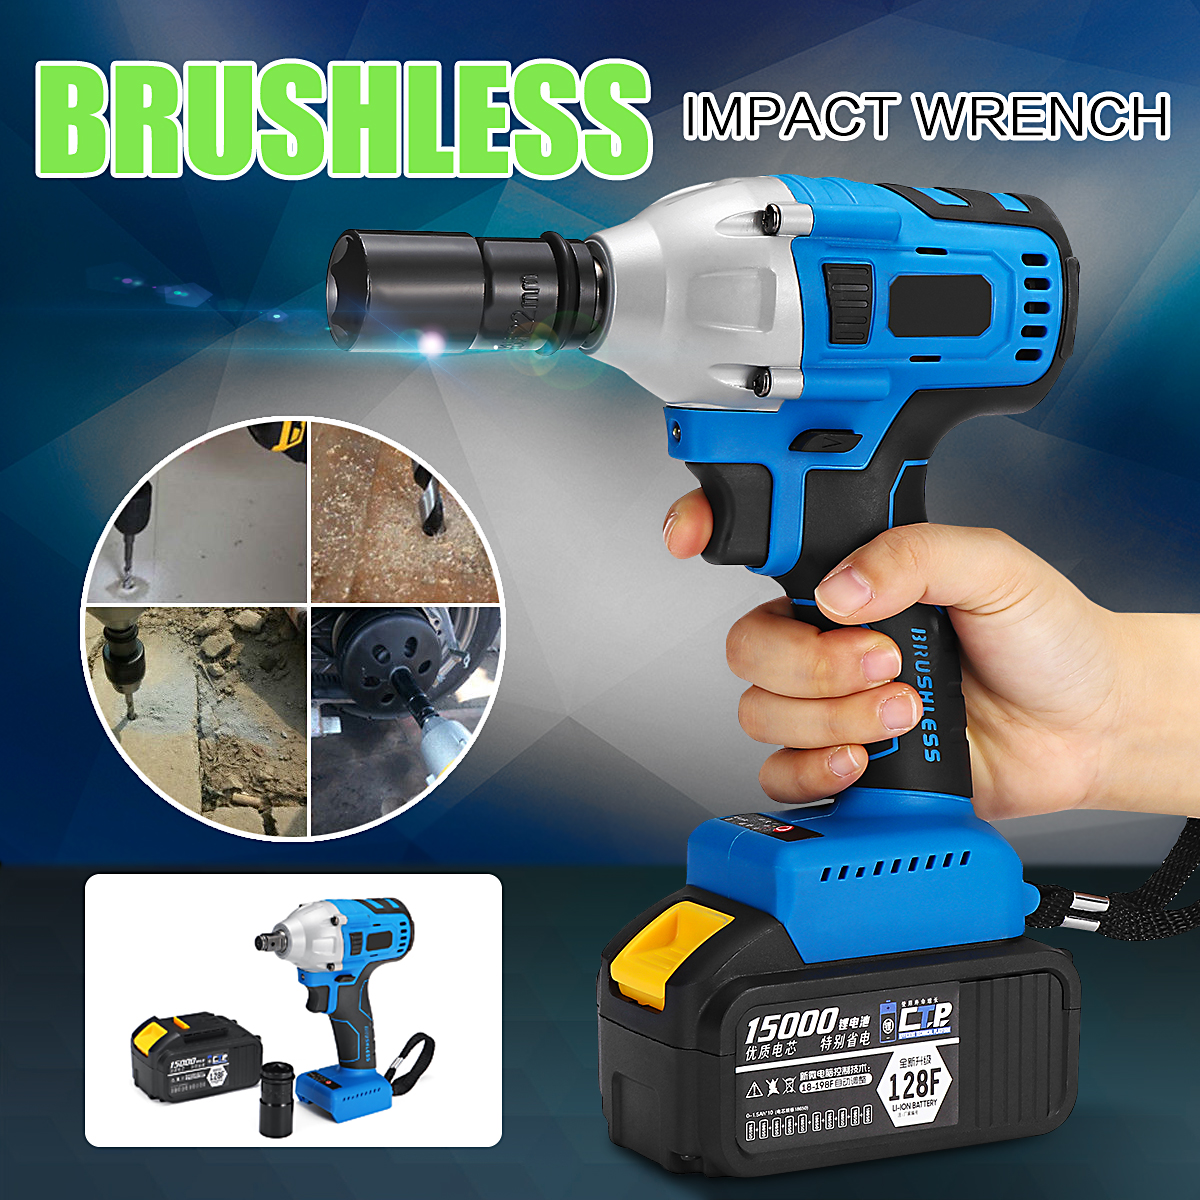 Electric-Screwdriver-Brushless-Cordless-Drill-Wireless-Electric-Wrench-Impact-Power-Tools-With-2-Bat-1380494-4